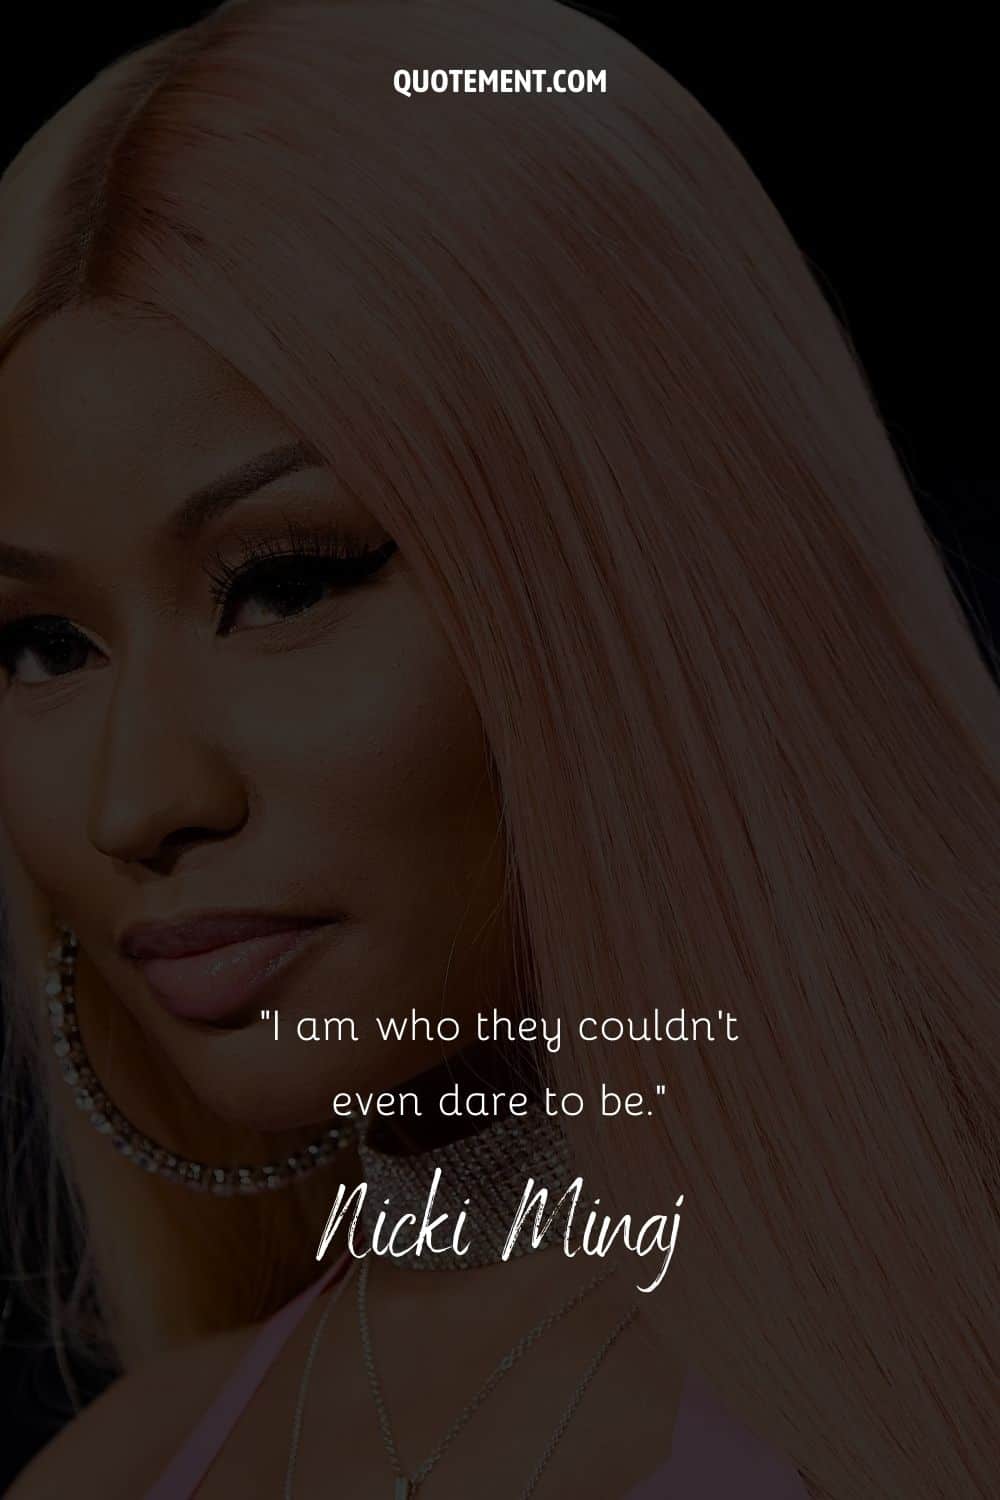 Sassy quote by the rapper Nicki Minaj and her photo in the background